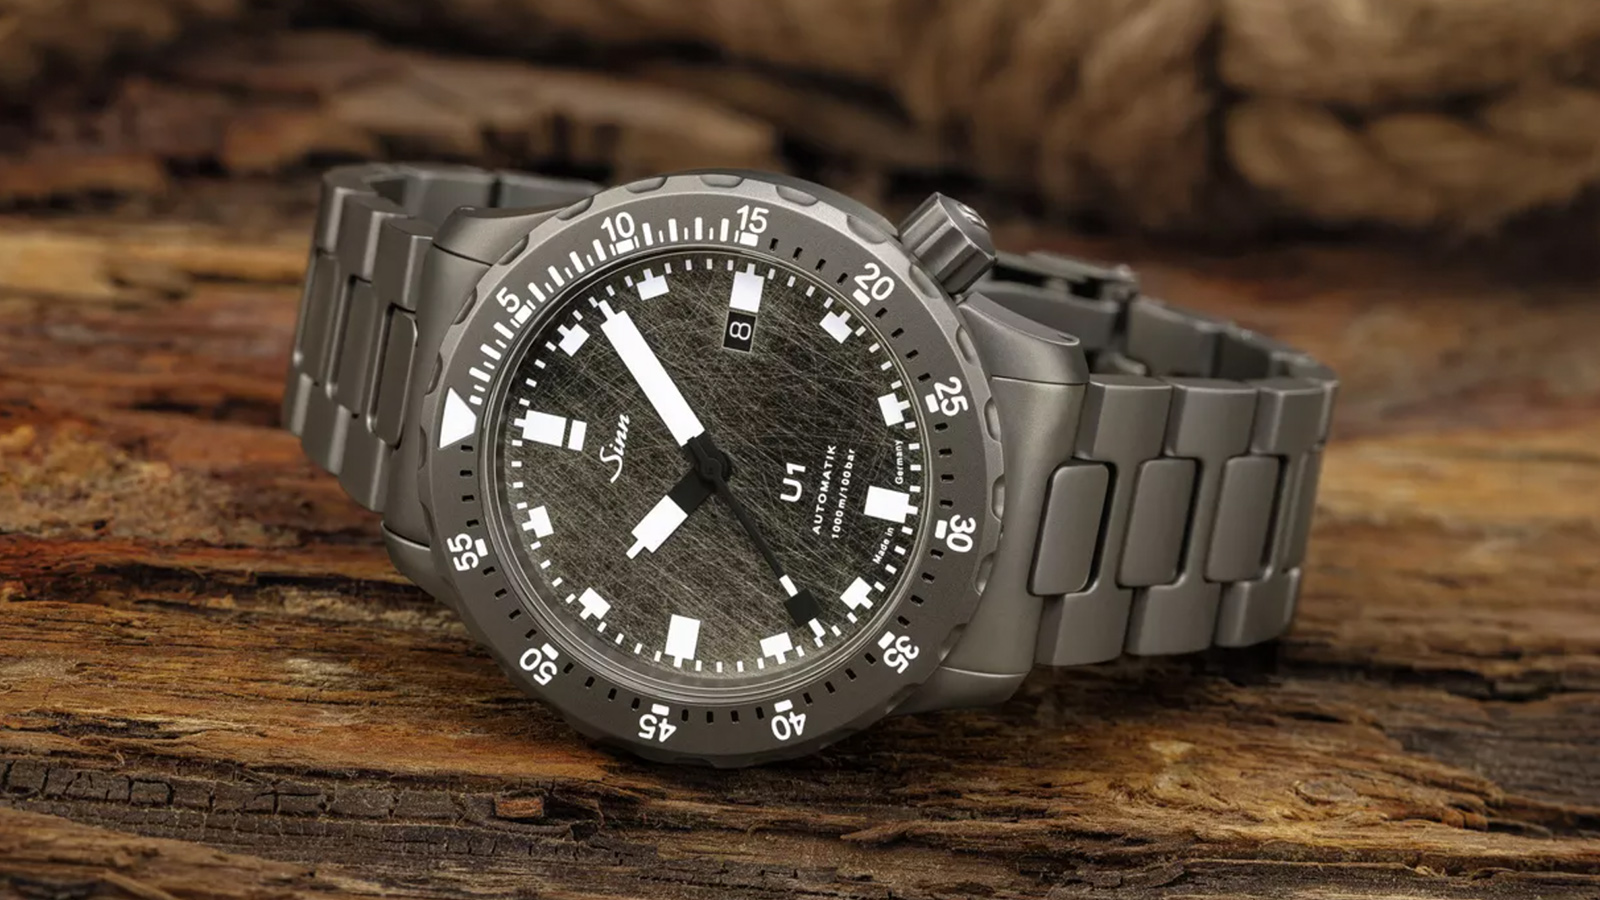 The Sinn U1 DS Is A Rugged Diving Watch With A Decorative Dial - IMBOLDN